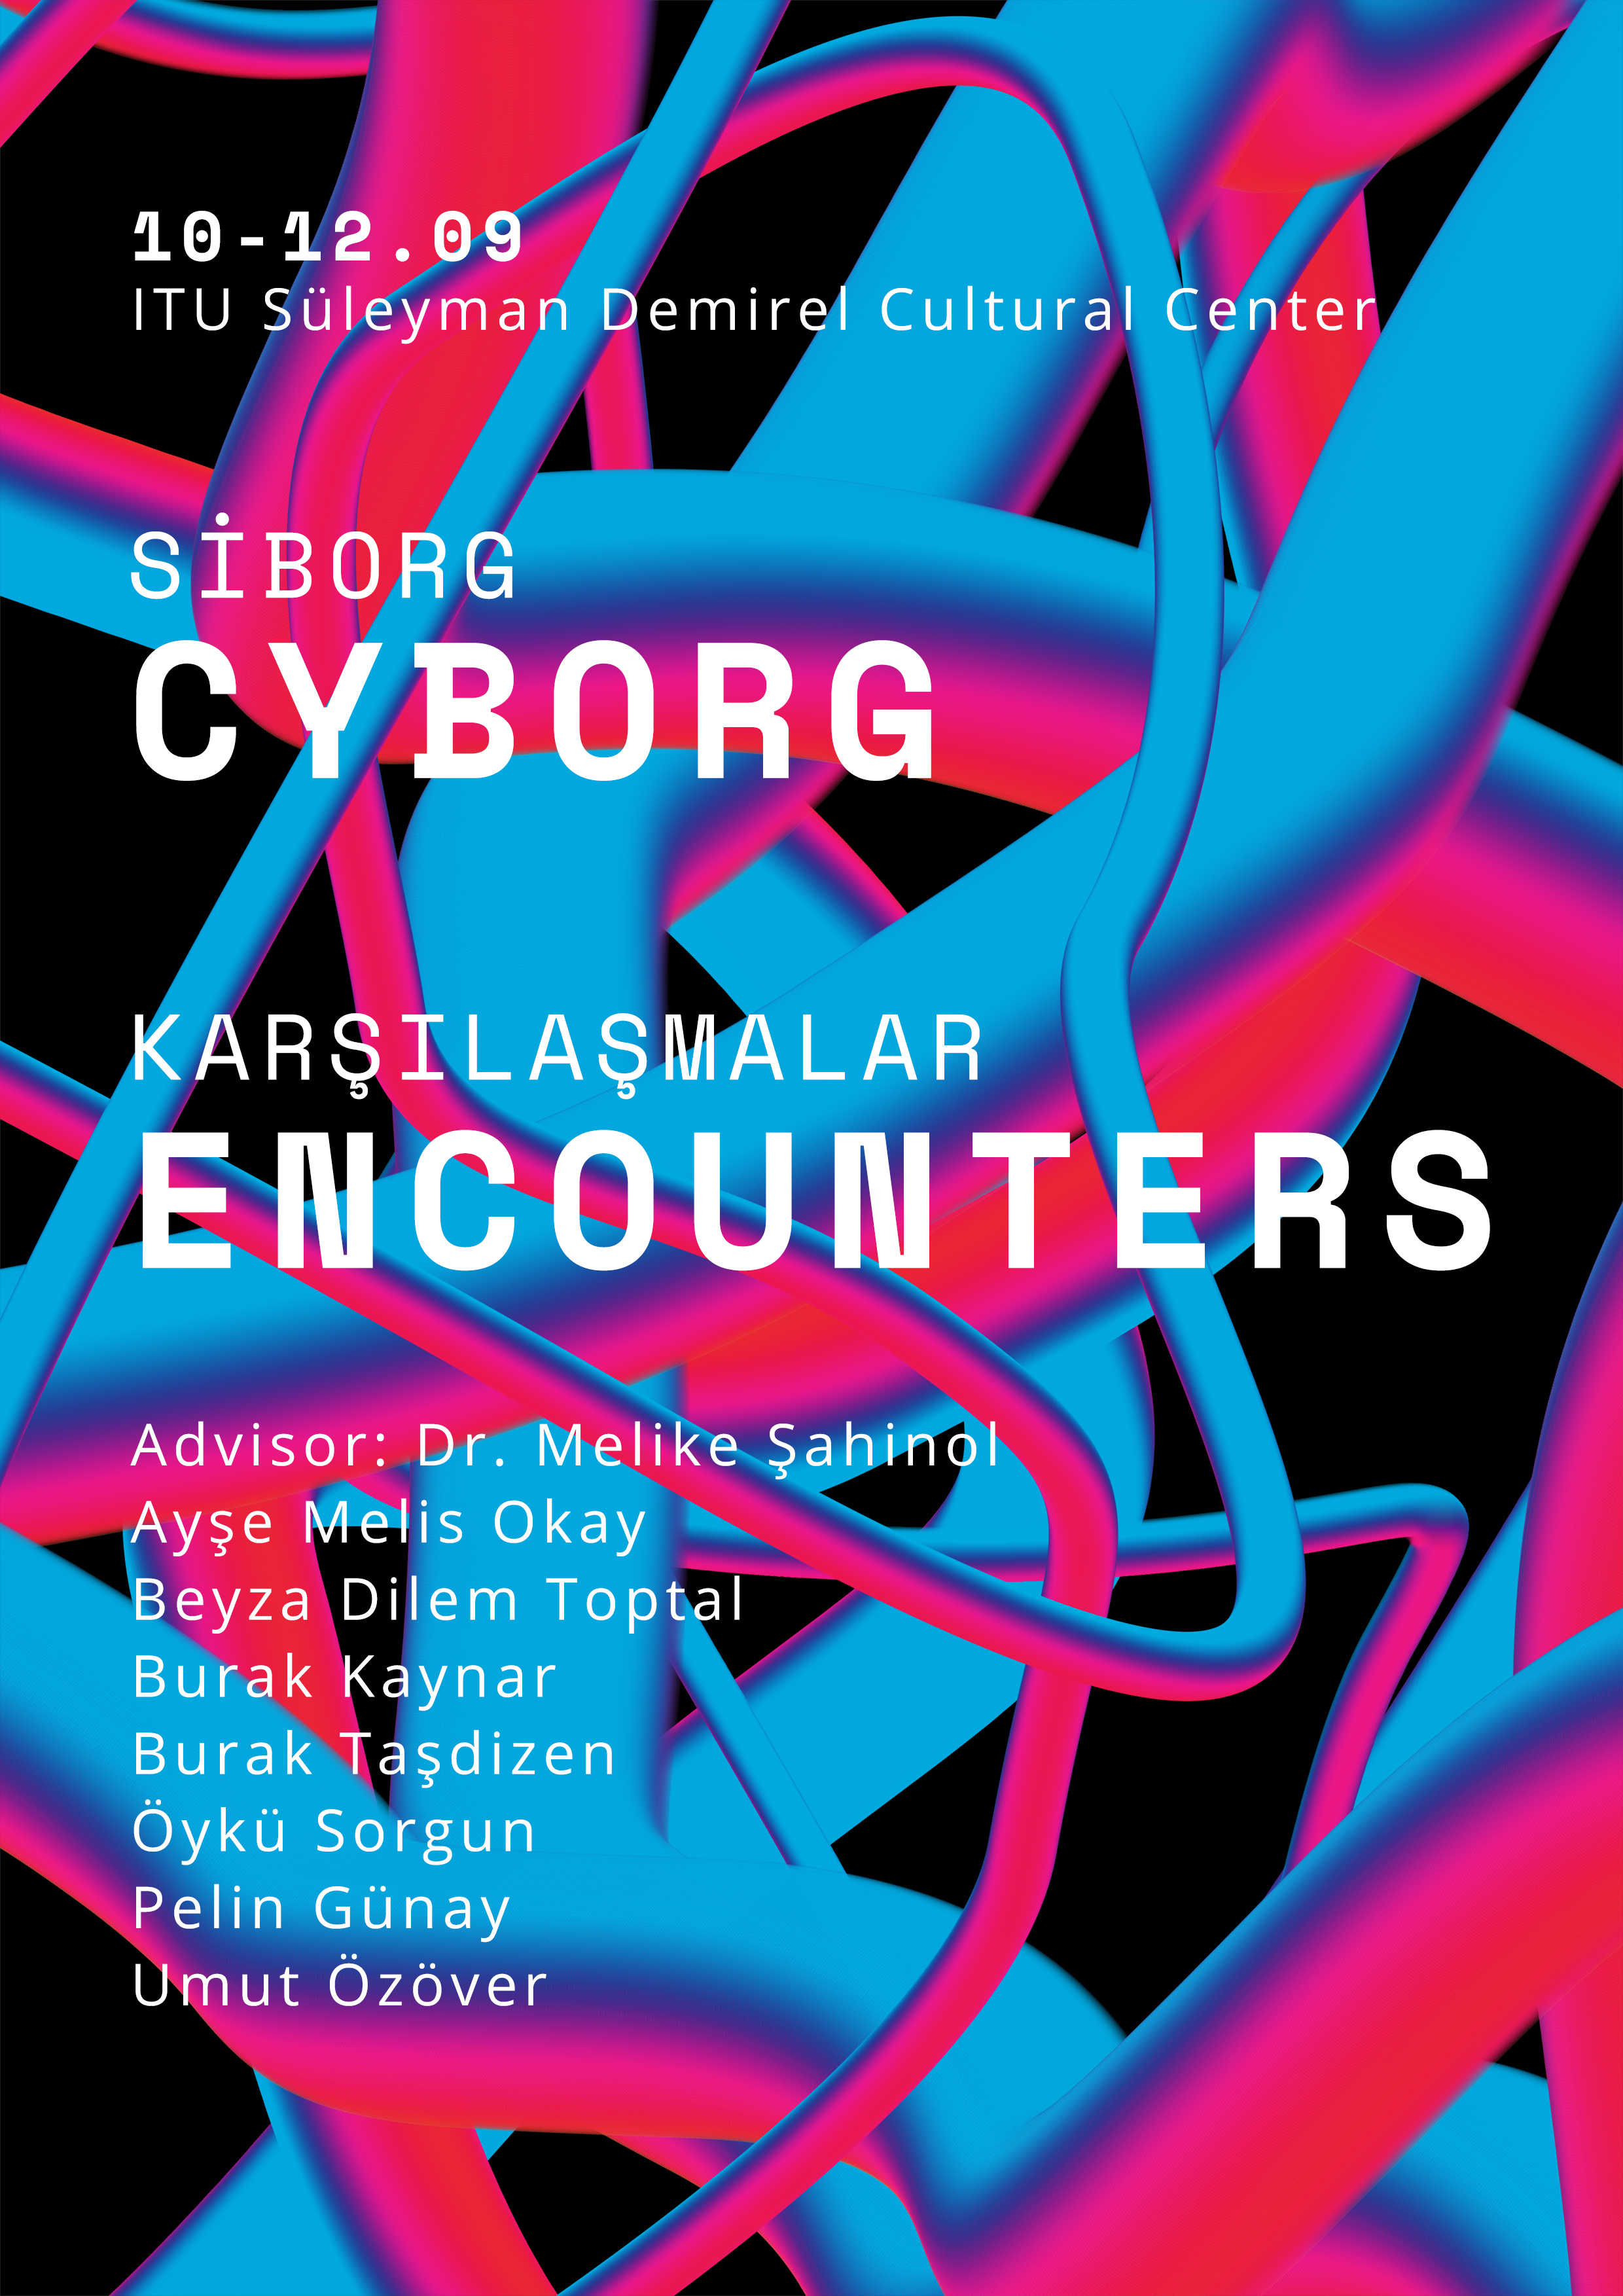 CyborgEncounters_poster_small